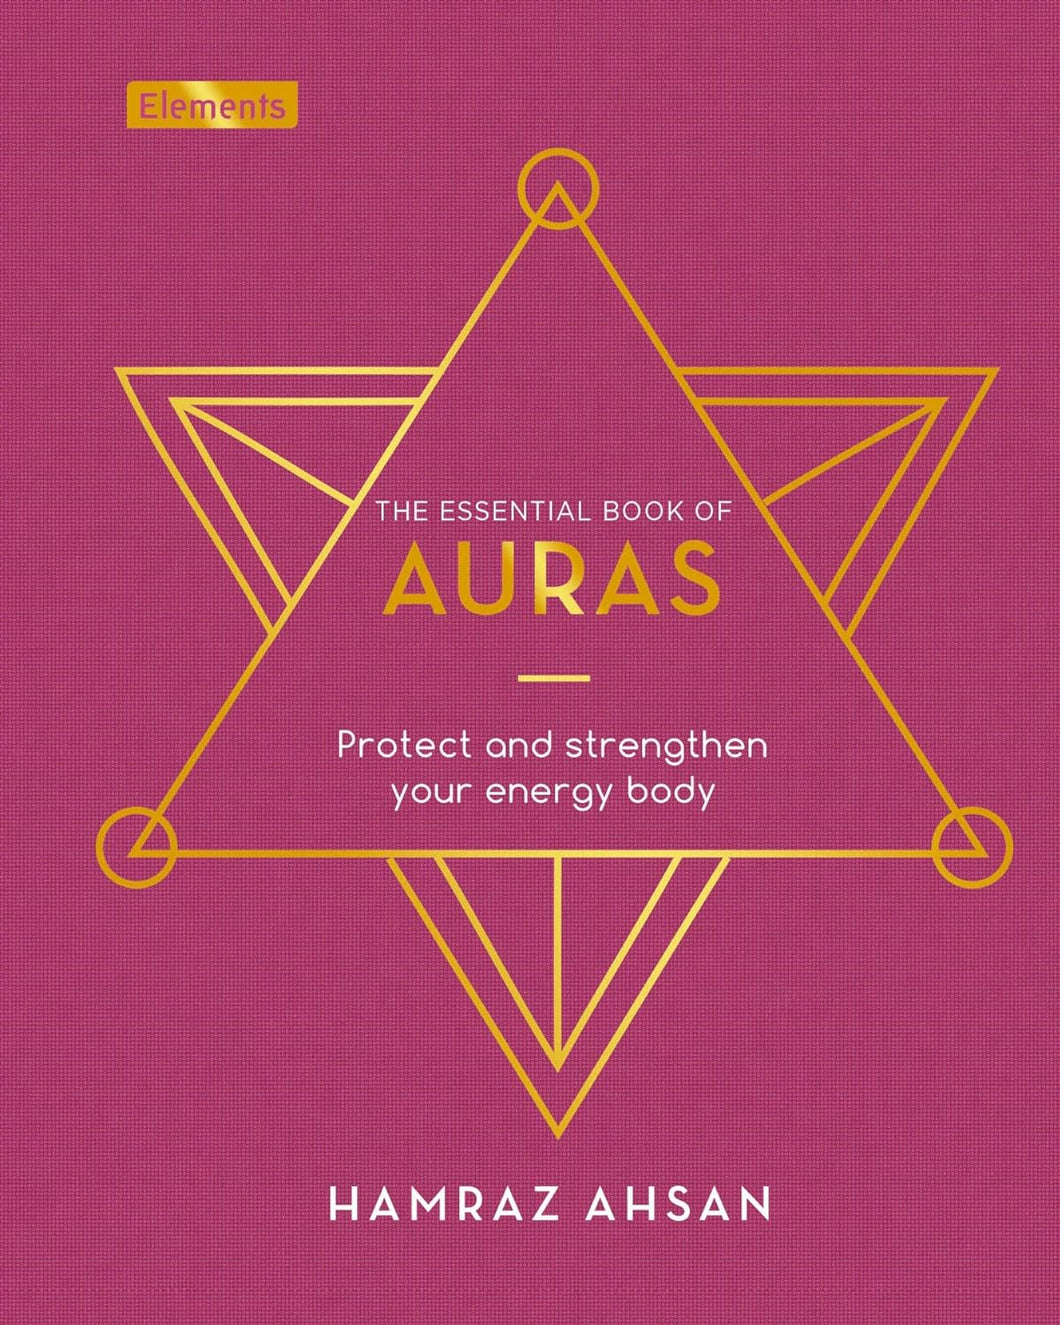 The Essential Book of Auras: Protect and Strengthen Your Energy Body